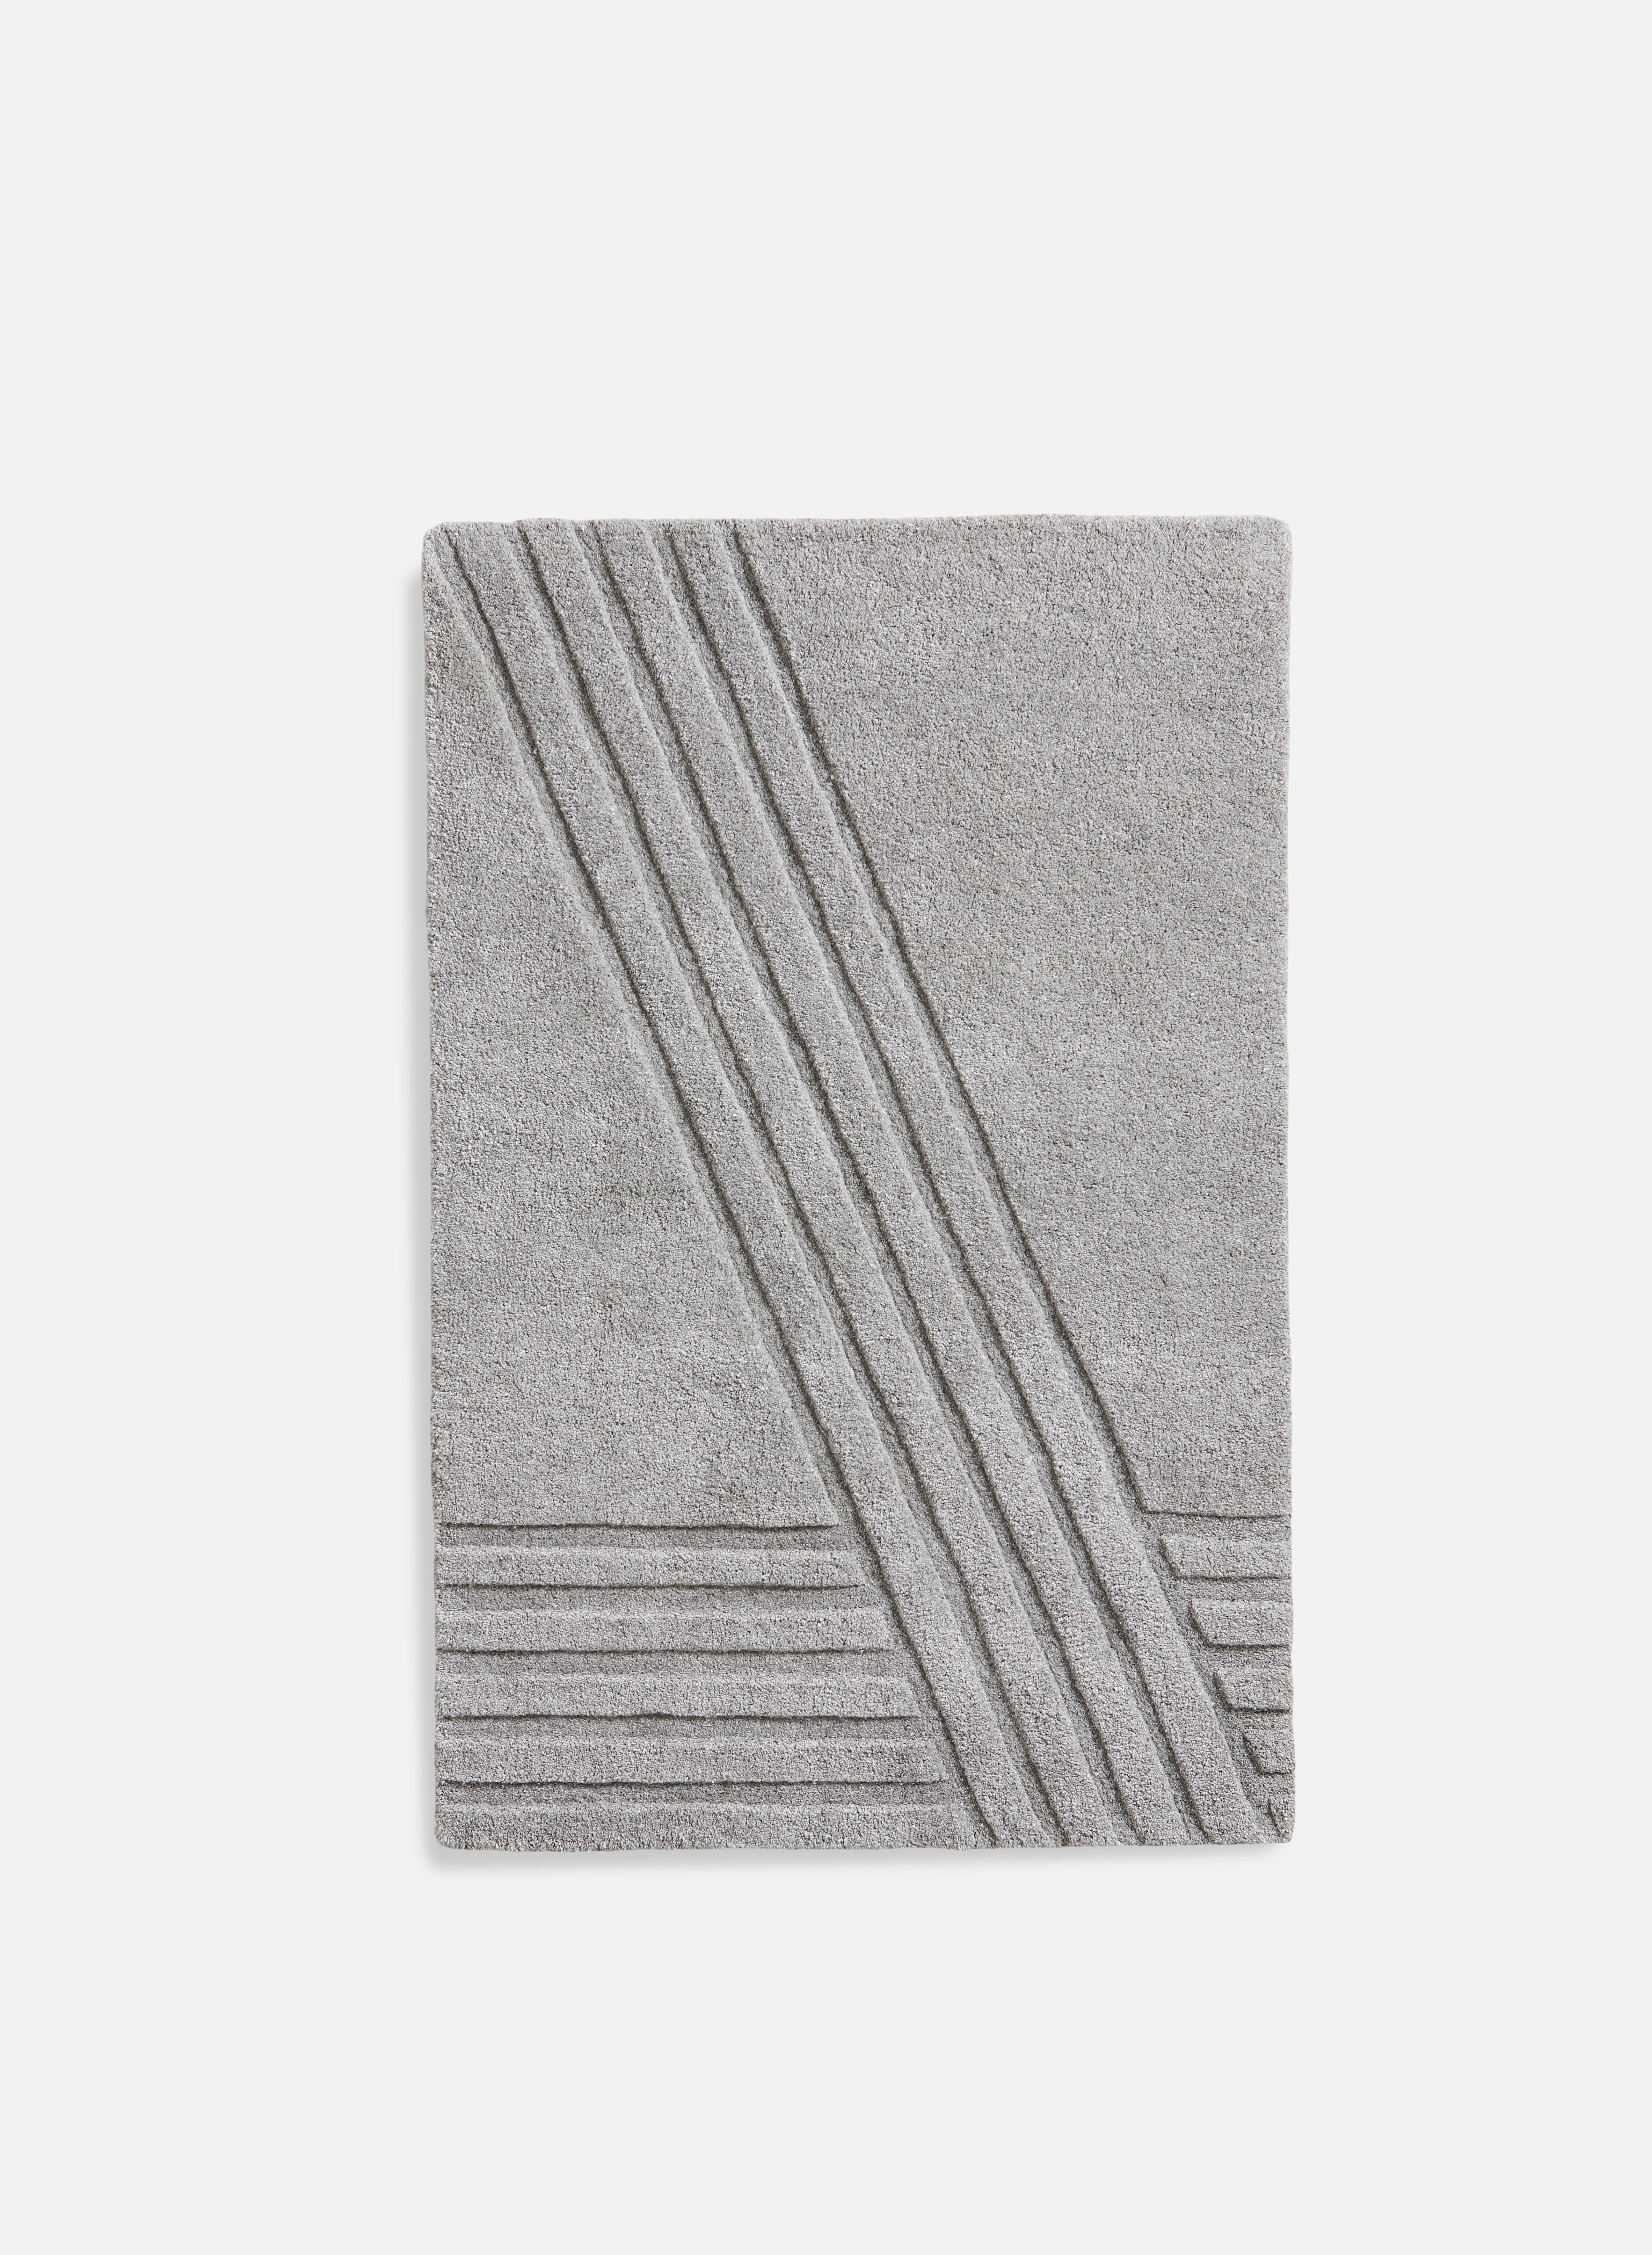 Post-Modern Grey Kyoto Rug I by AD Miller For Sale